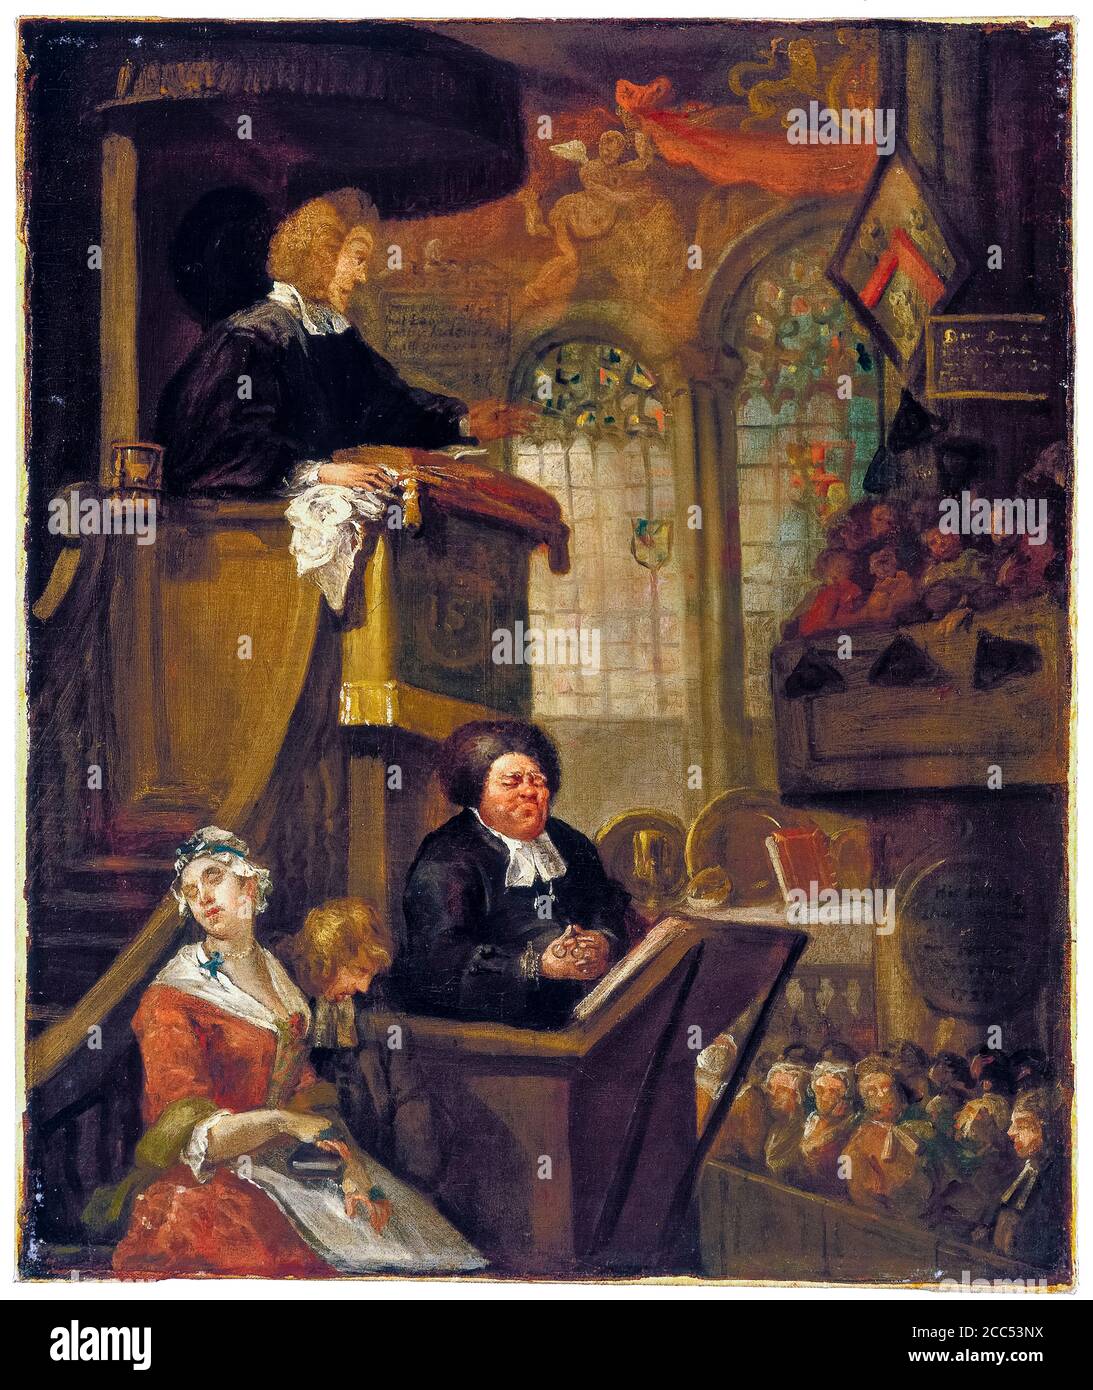 The Sleeping Congregation (sketch), painting by William Hogarth, 1728 Stock Photo